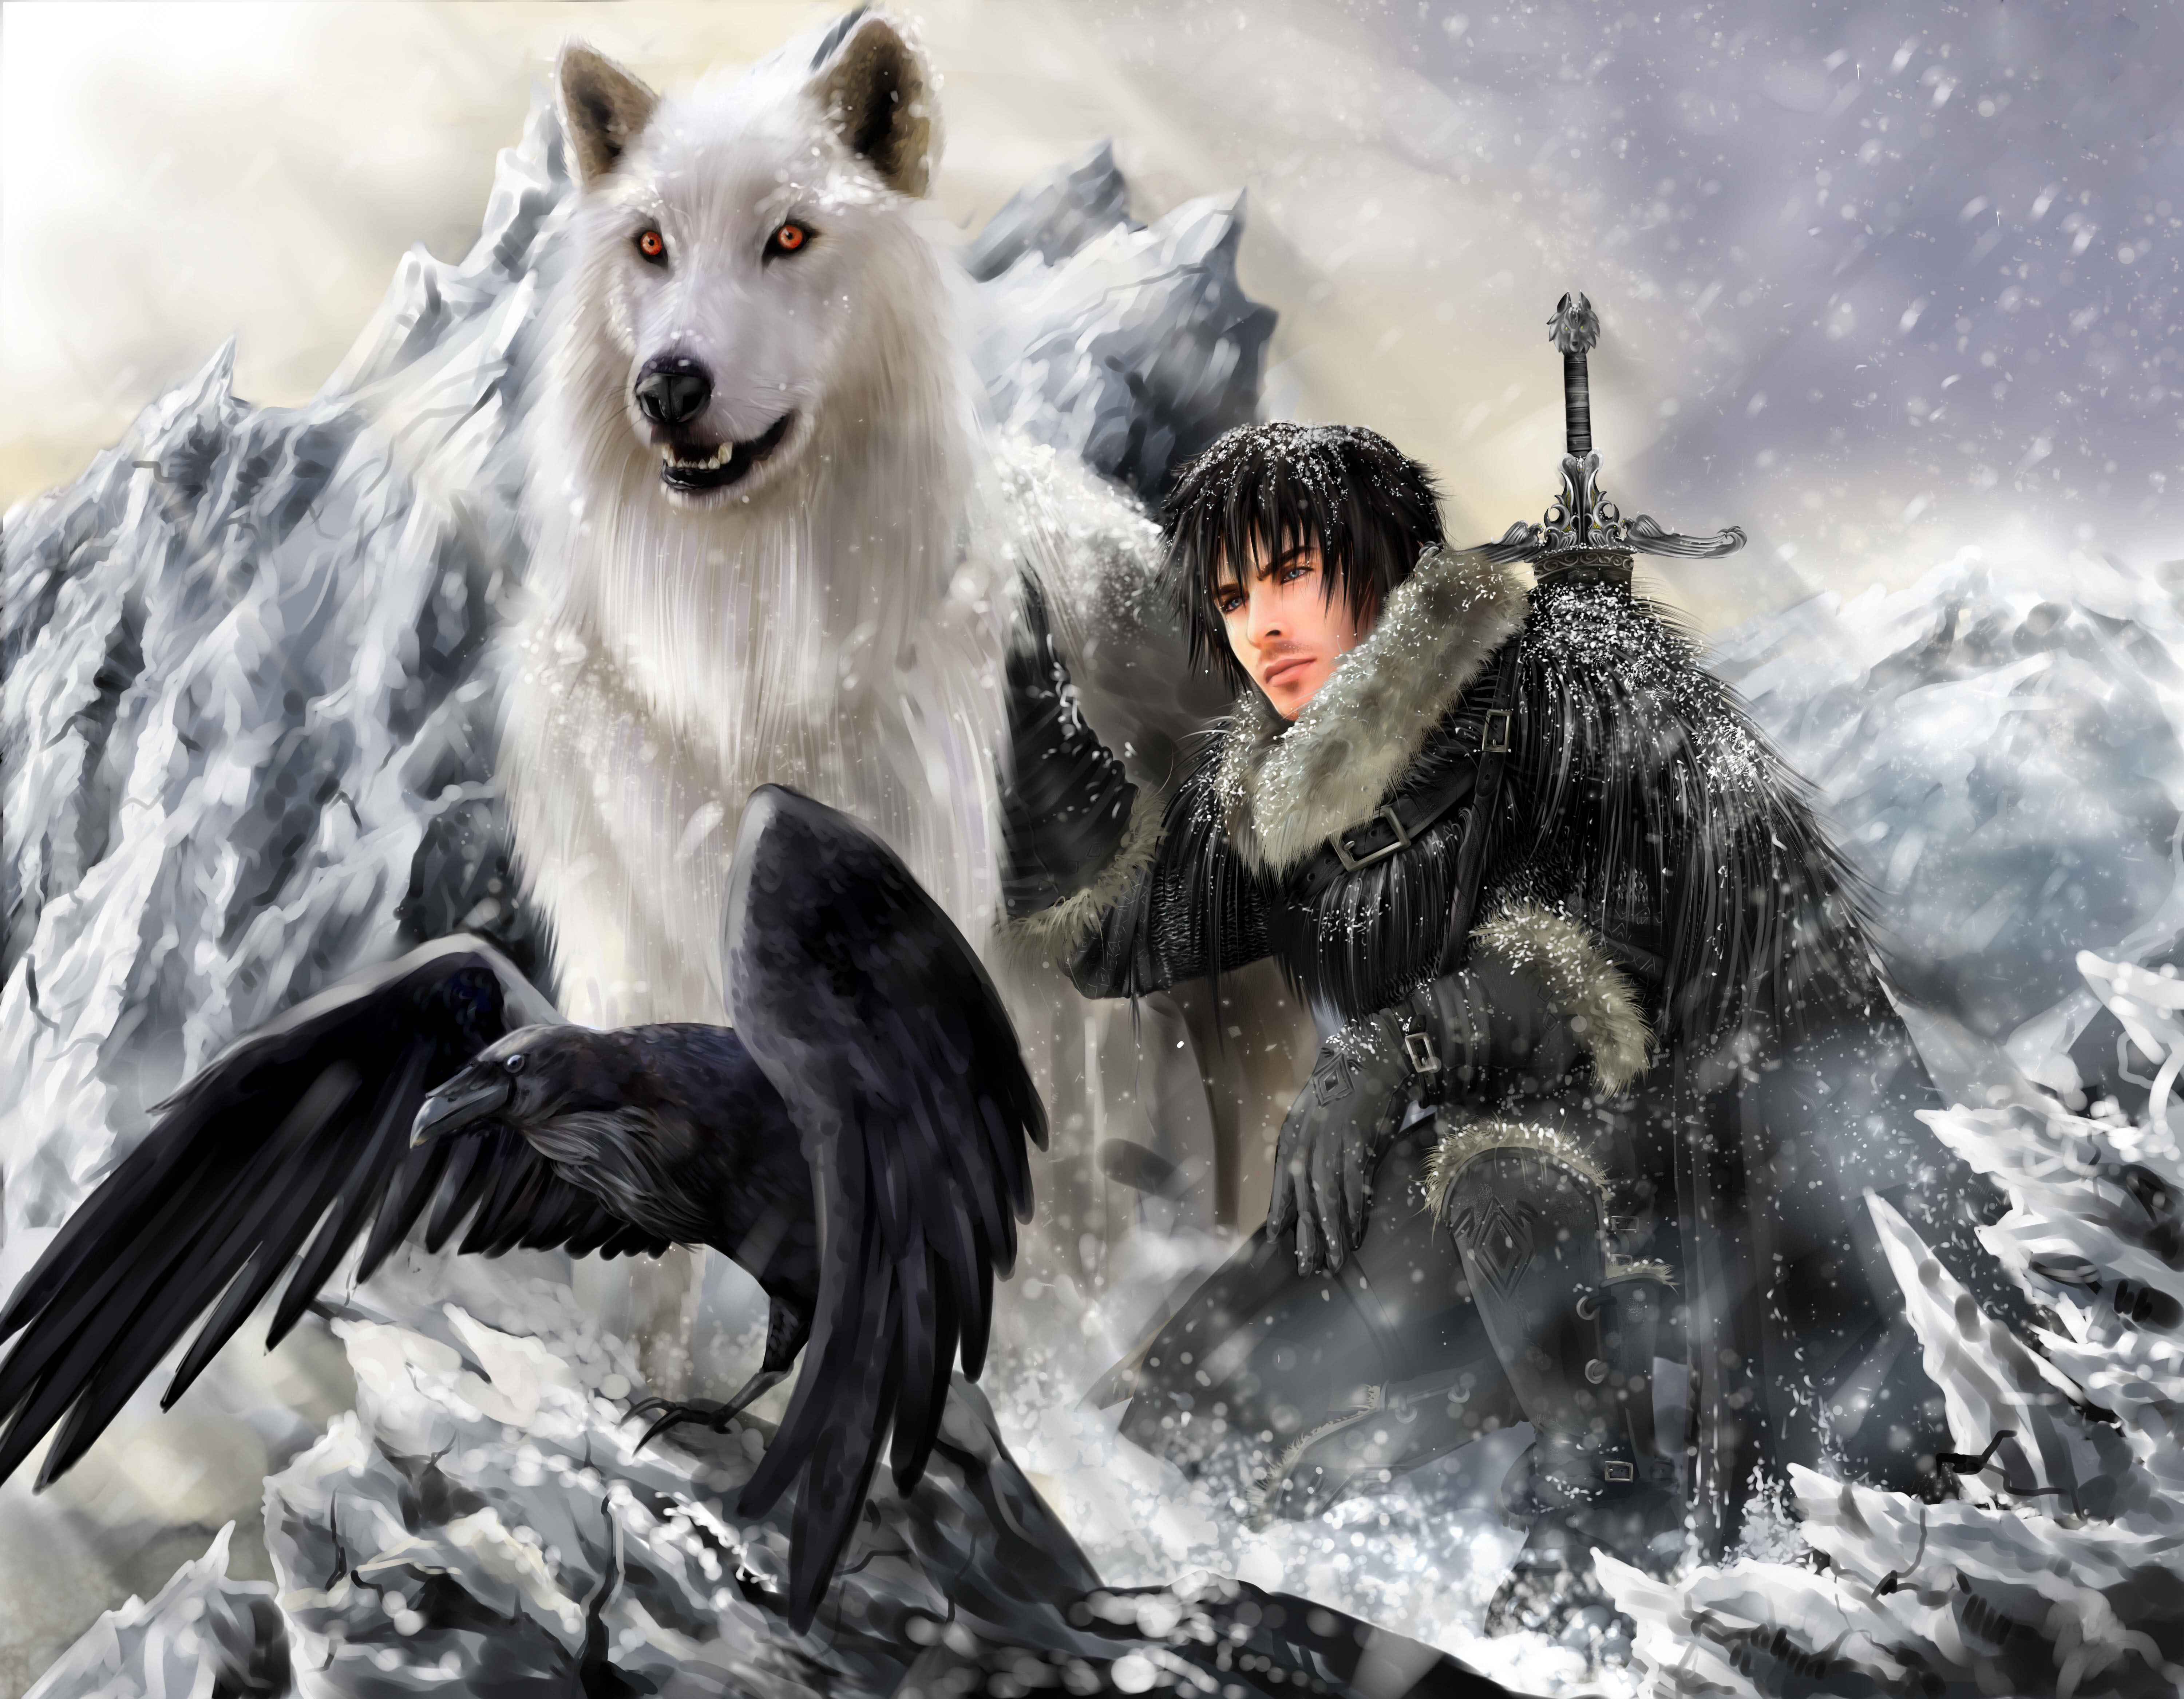 The song of ice and fire Game of thrones Jon snow Ghost Direwolf Stark clan